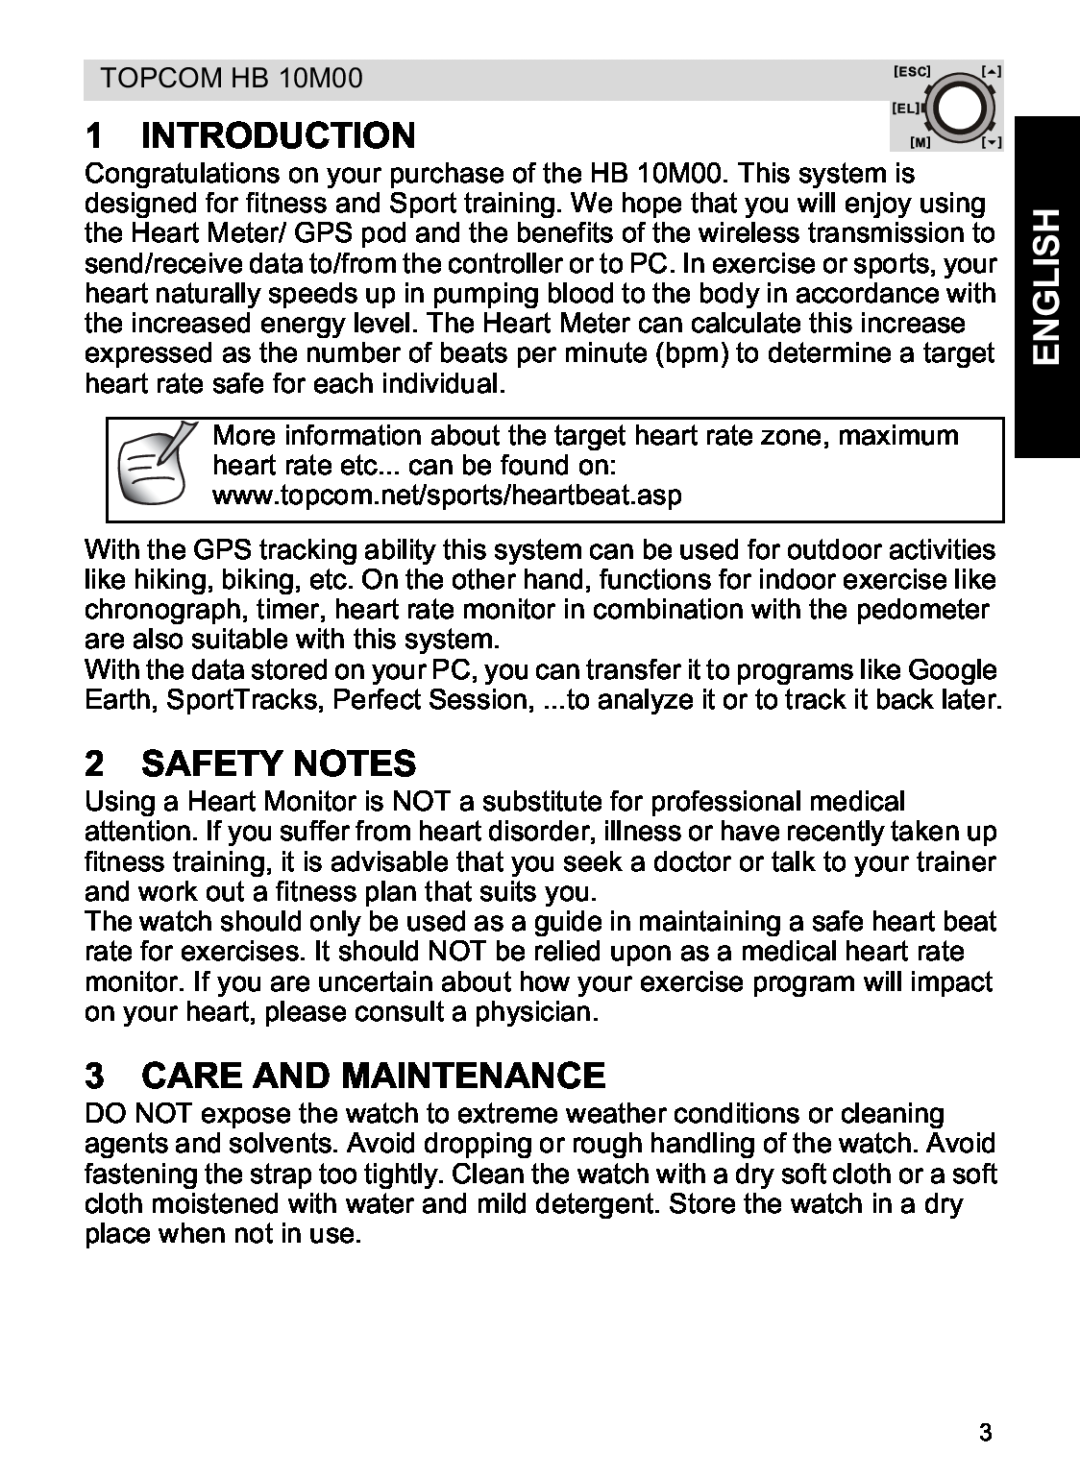 Topcom HB 10M00 manual Introduction, Safety Notes, Care And Maintenance, English 